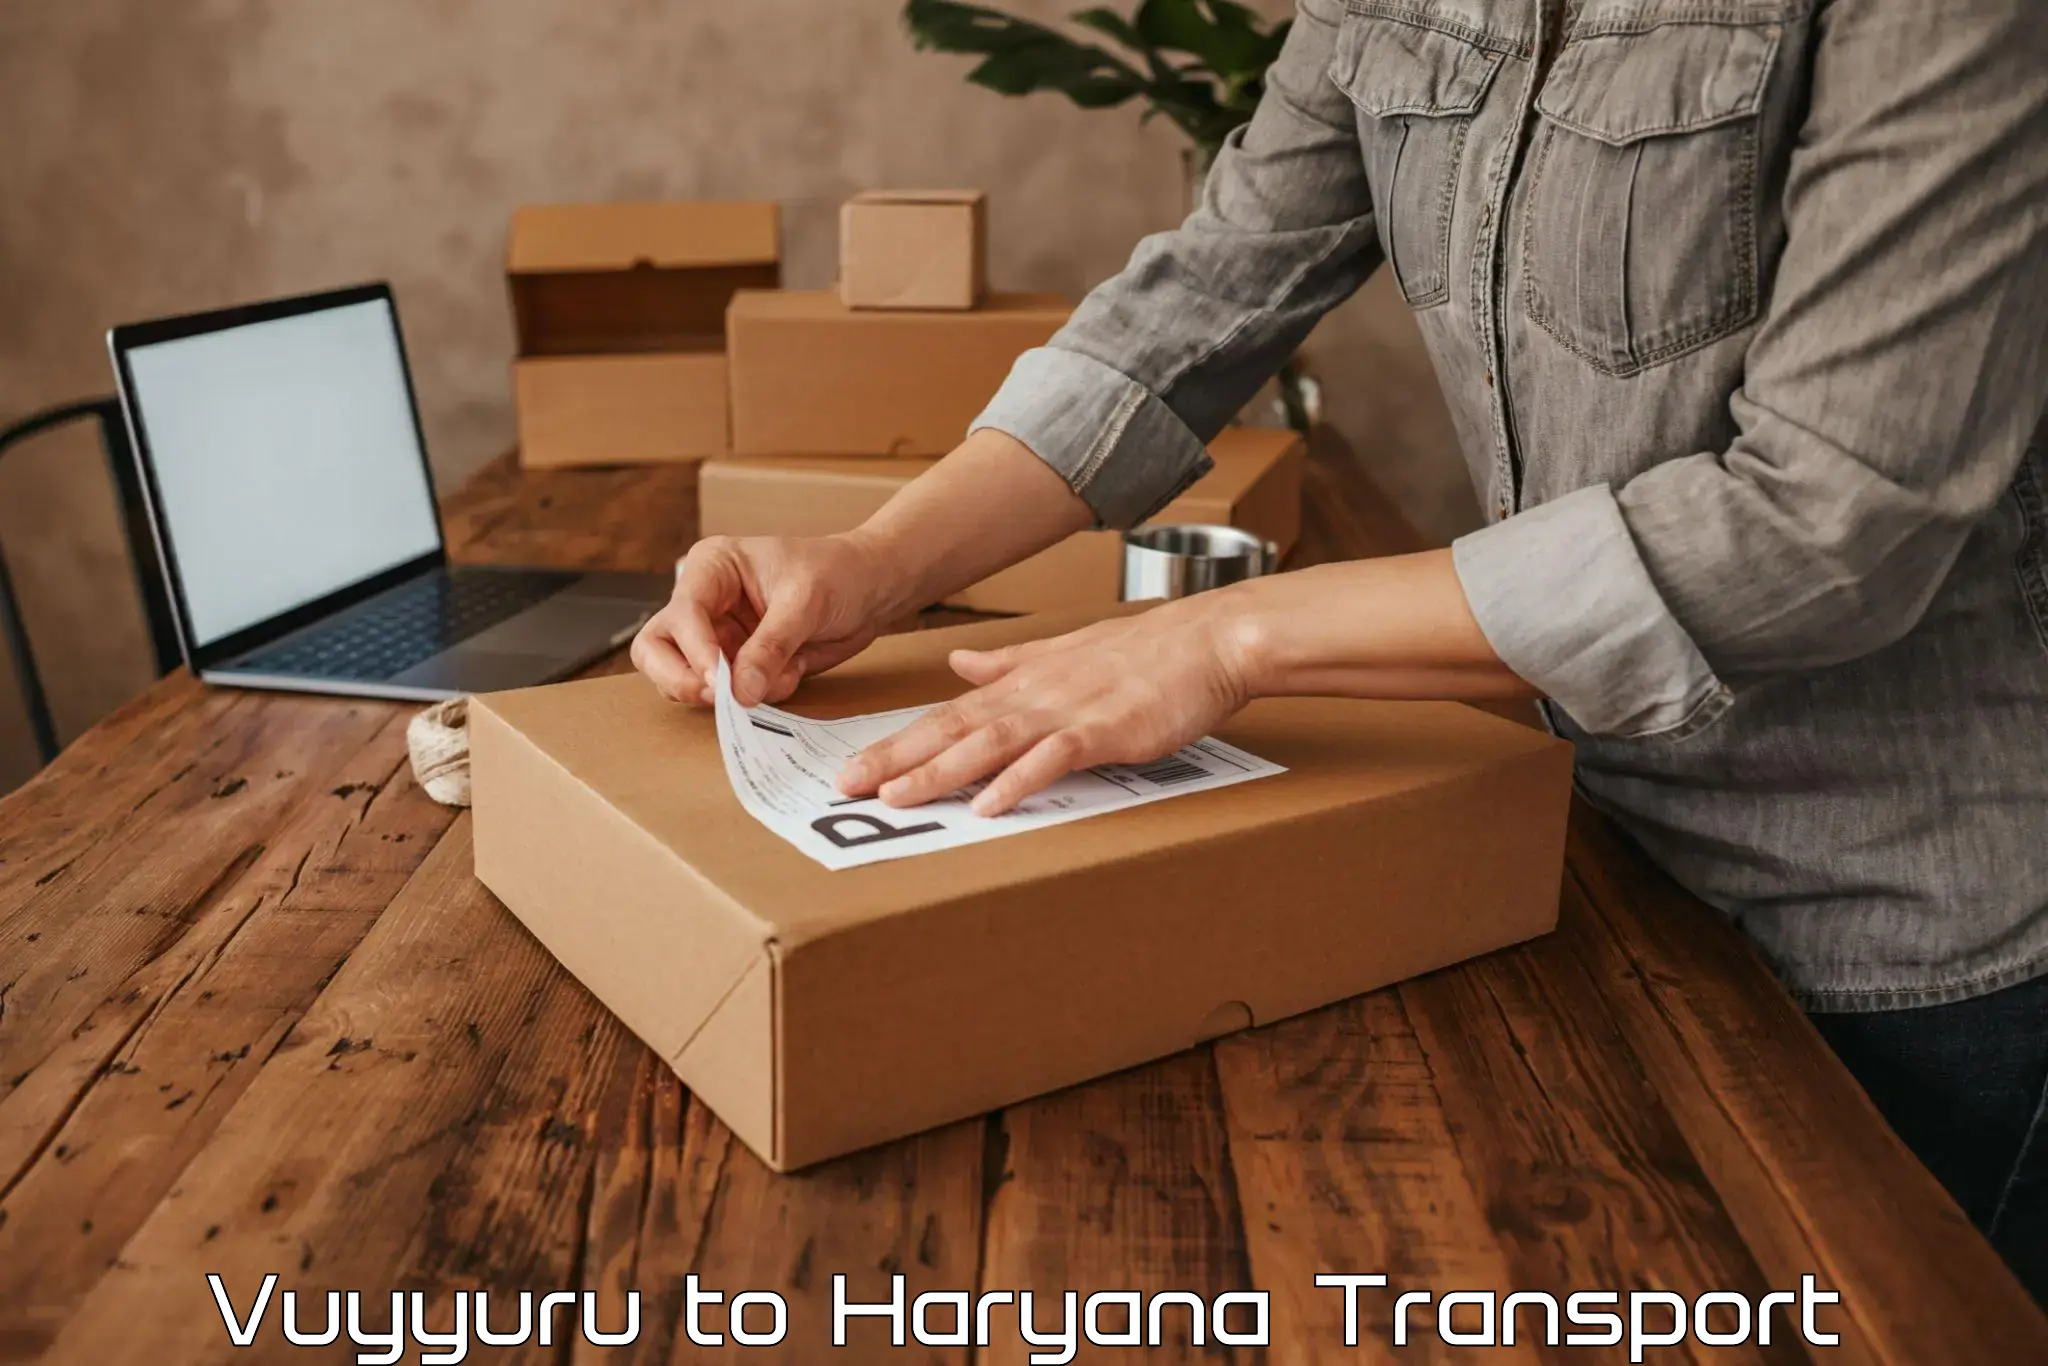 Best transport services in India Vuyyuru to Fatehabad